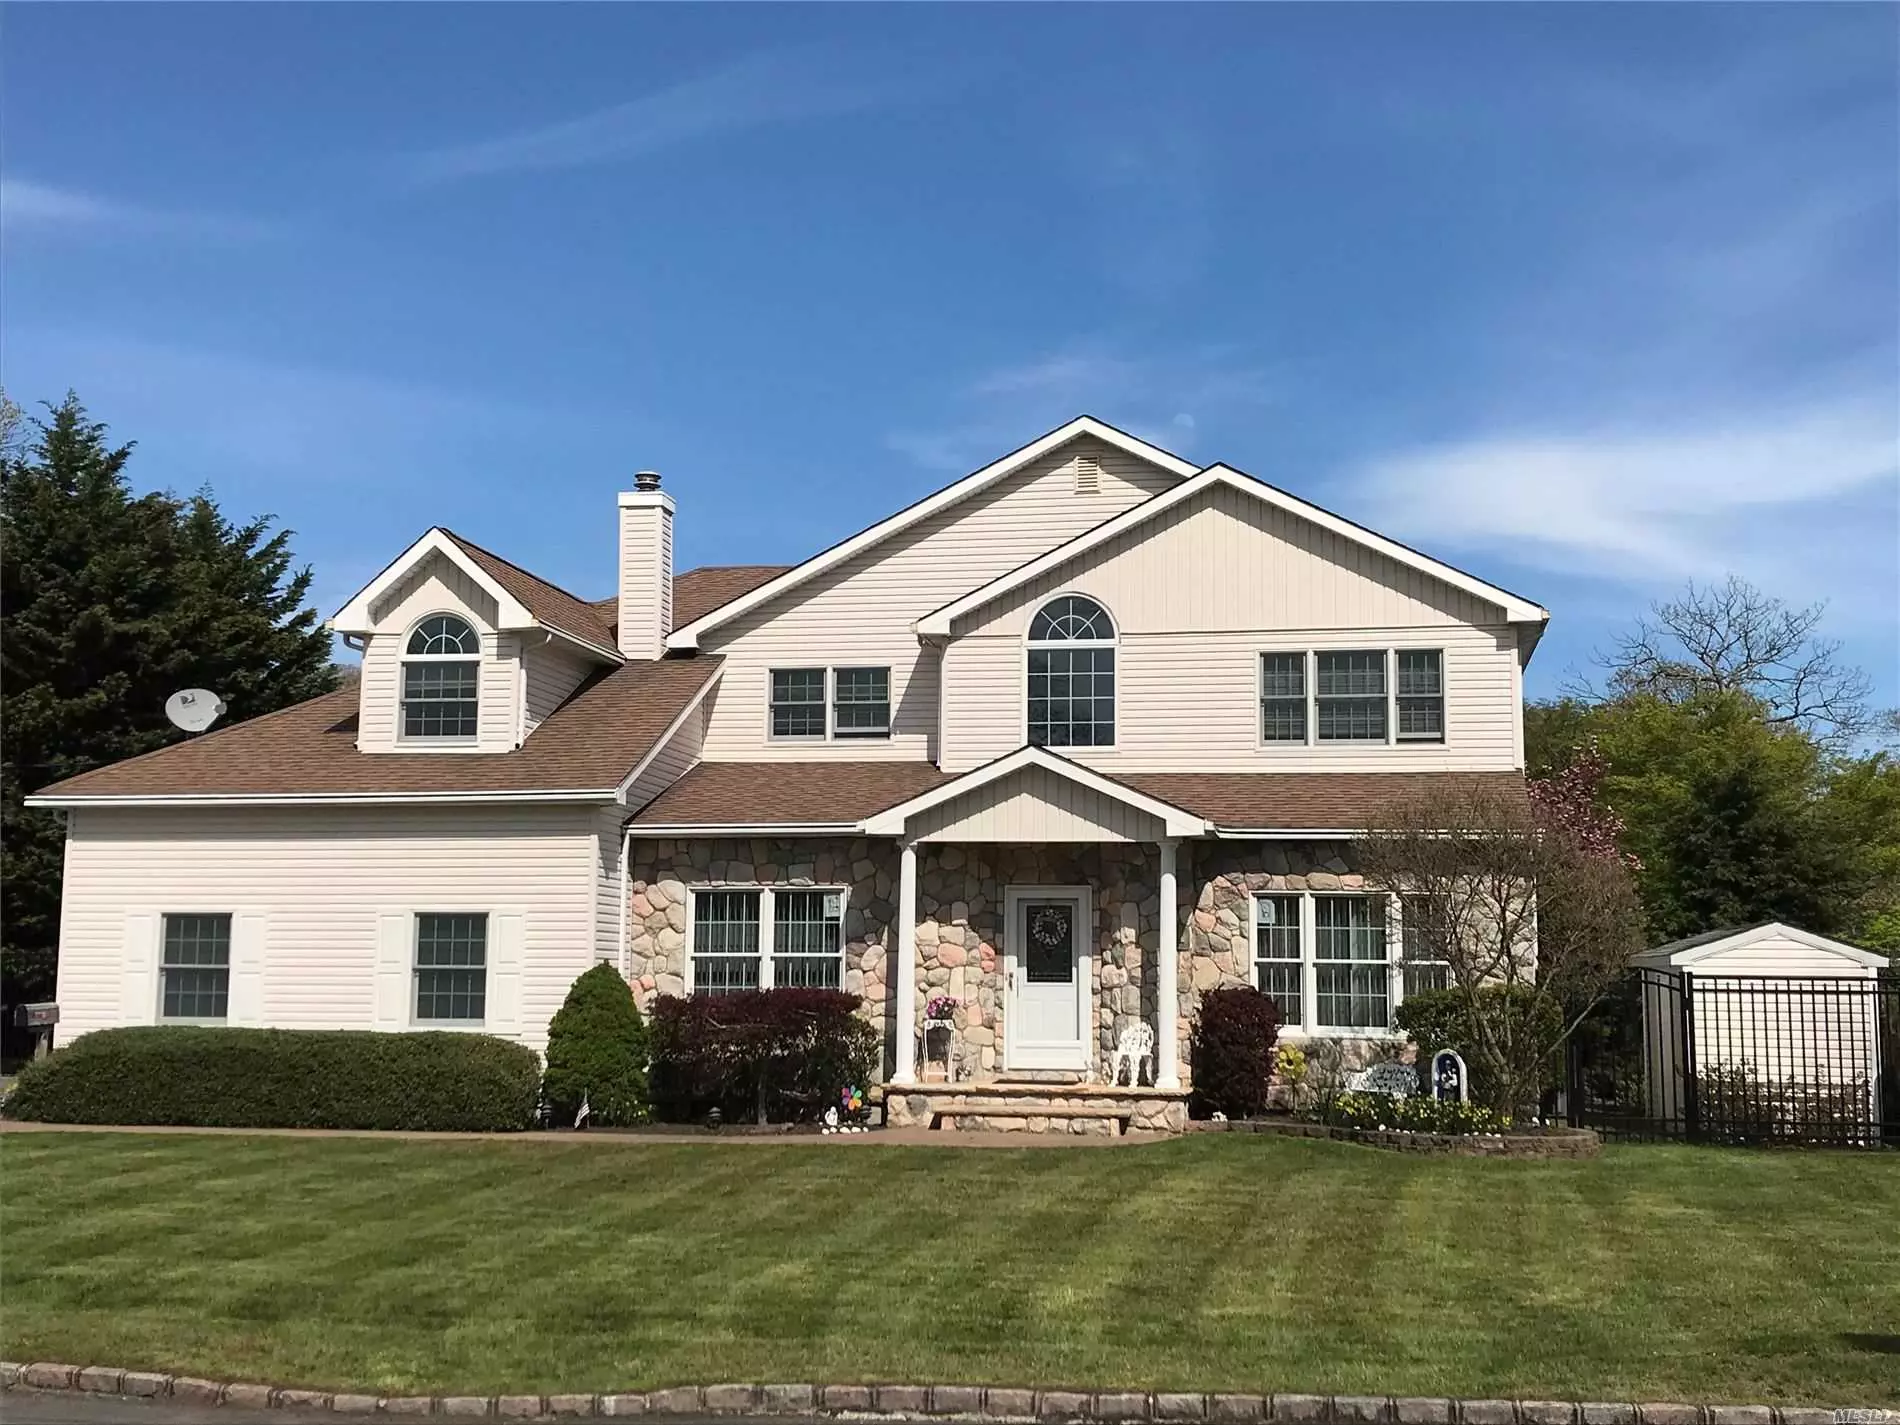 Beautiful Custom Built 5 bed/ 3 bth Center Hall Colonial Located SOM on a Quiet Block. First Floor w Entry Foyer/ Living Rm / Dining Rm/Family Room/EIK/ Bdrm ( or office) Laundry/ 9ft Ceilings Second Floor w 3 Bedroom / Master Ensuite w 2 WIC. Radiant Heat in Kitchen & Baths...